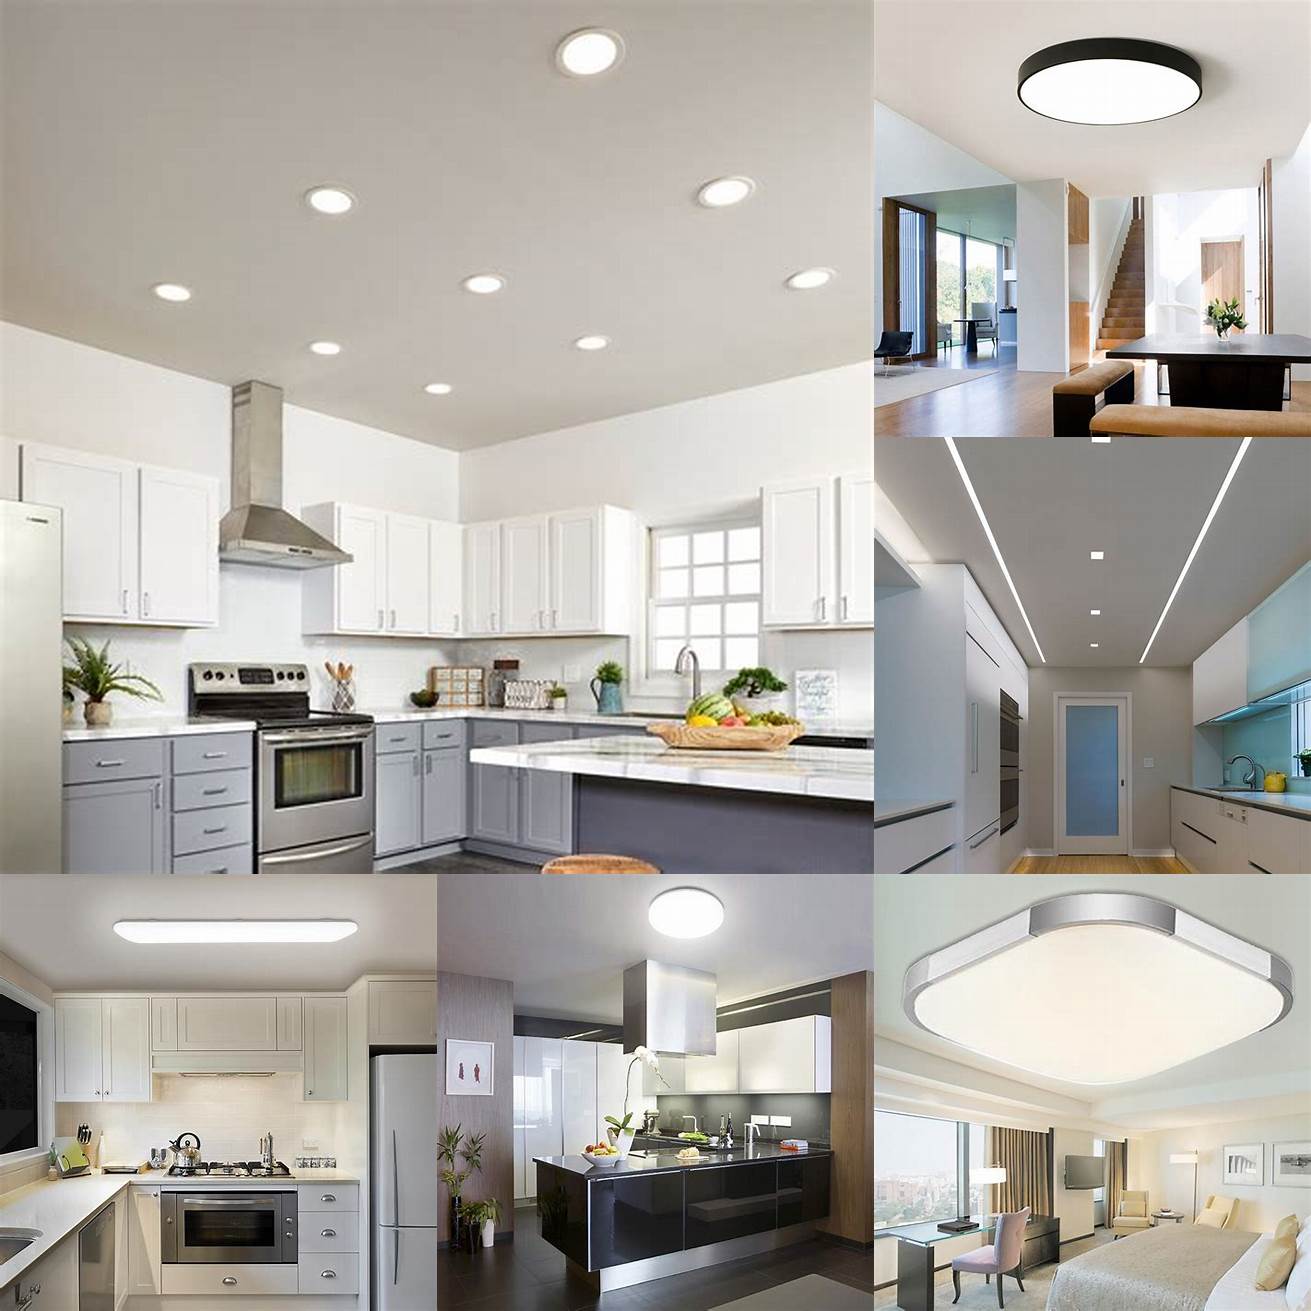 LED ceiling light in a small kitchen